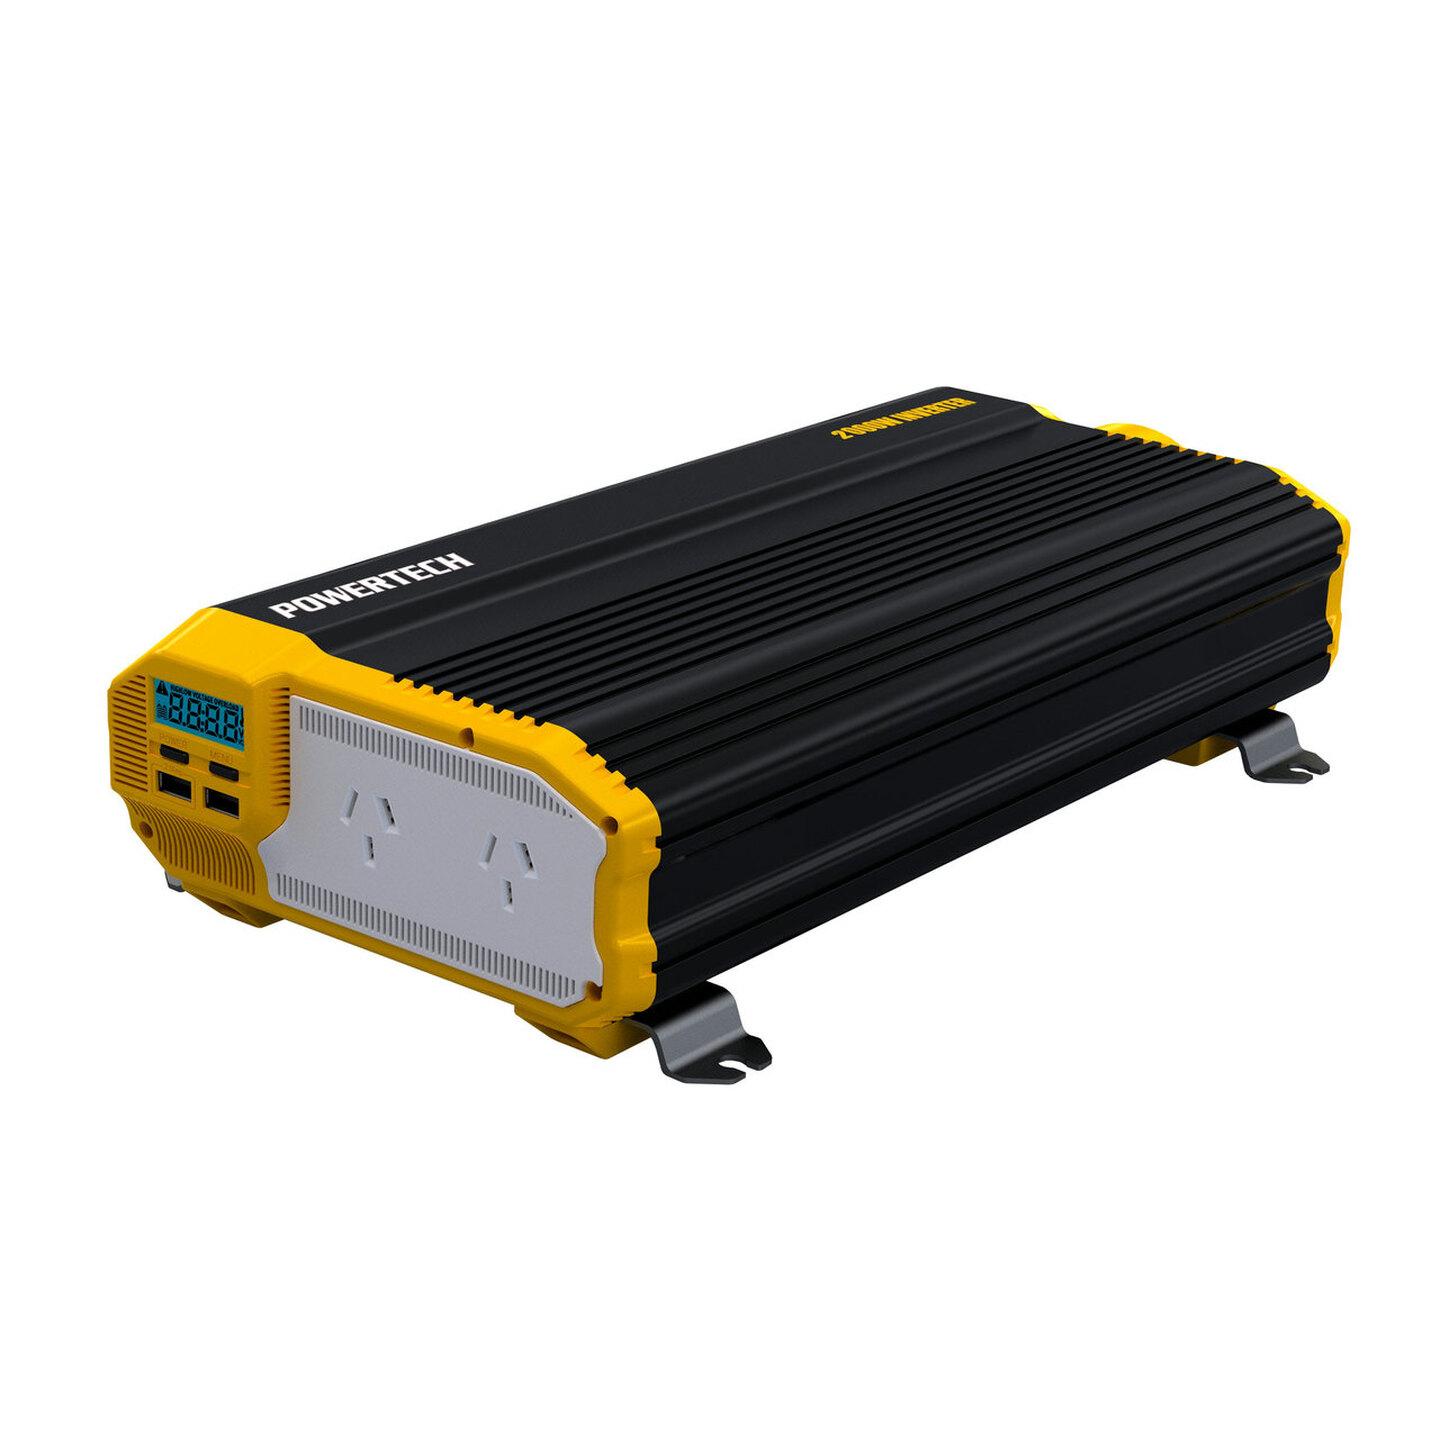 2000W 4000W 12VDC to 230VAC Modified Sinewave Inverter with 2X2.1USB and LCD Display